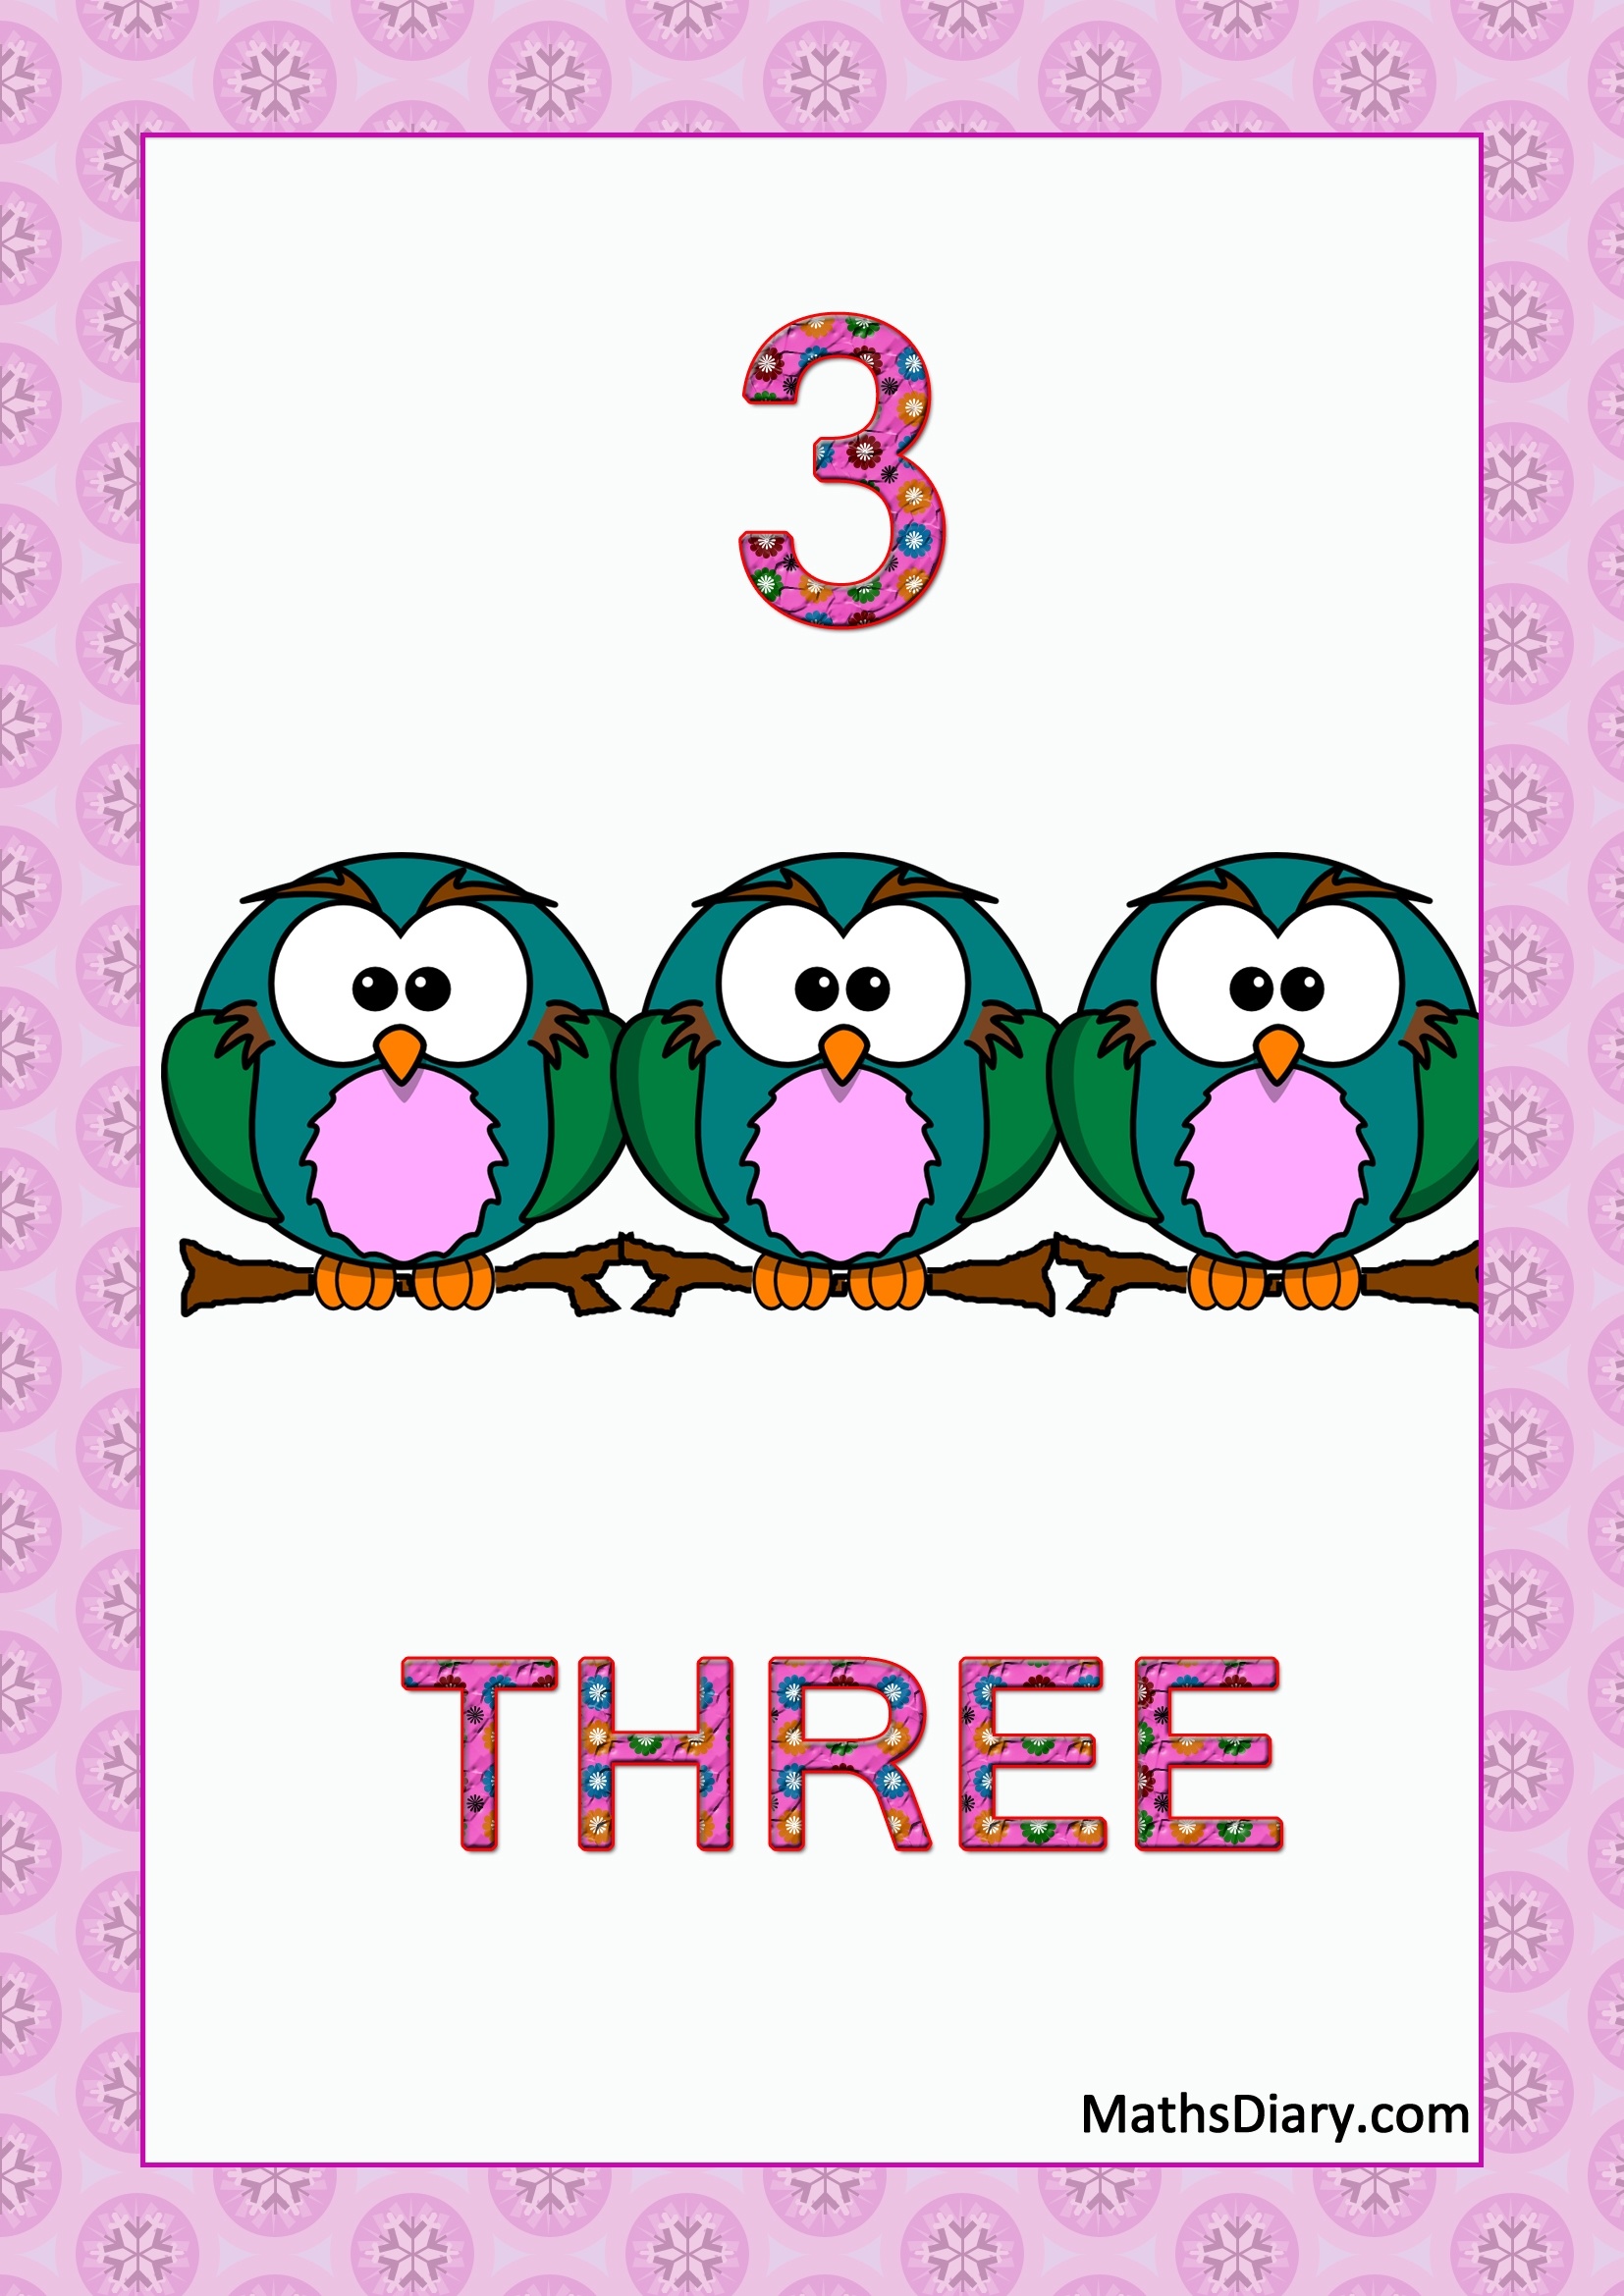 Learning Counting And Recognition Of Number 3 Worksheets Level 1 Help Sheets Part 3